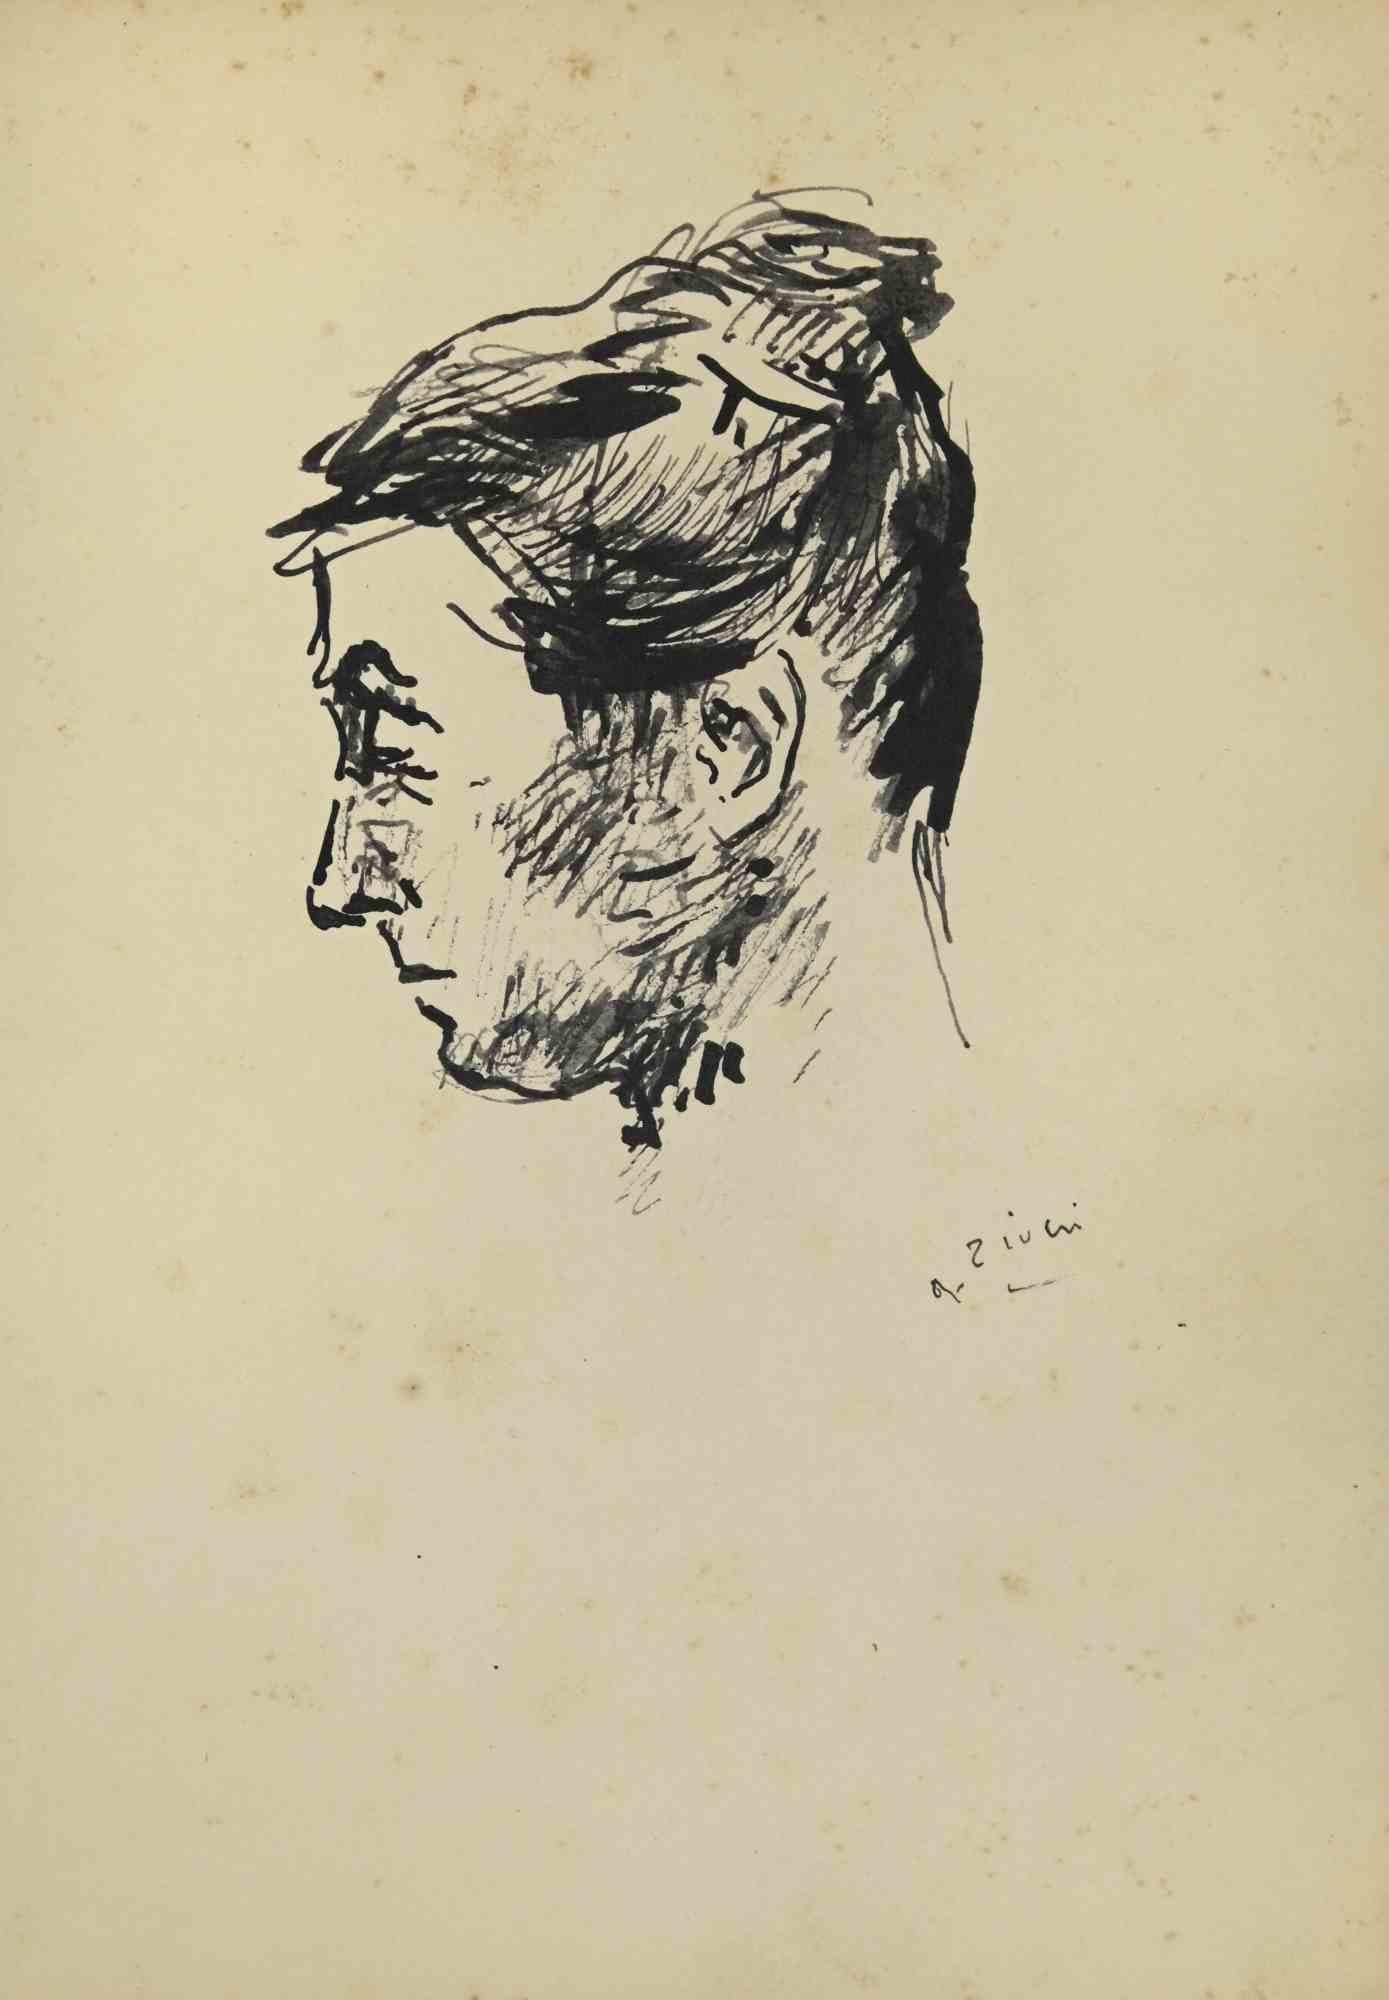 Portrait is a drawing realized by Alberto Ziveri in the 1930s.

Watercolor on paper.

Hand-signed.

In good conditions.

The artwork is represented through deft strokes masterly.

Alberto Ziveri (Rome,1908 – 1990), the Italian painter of the Roman